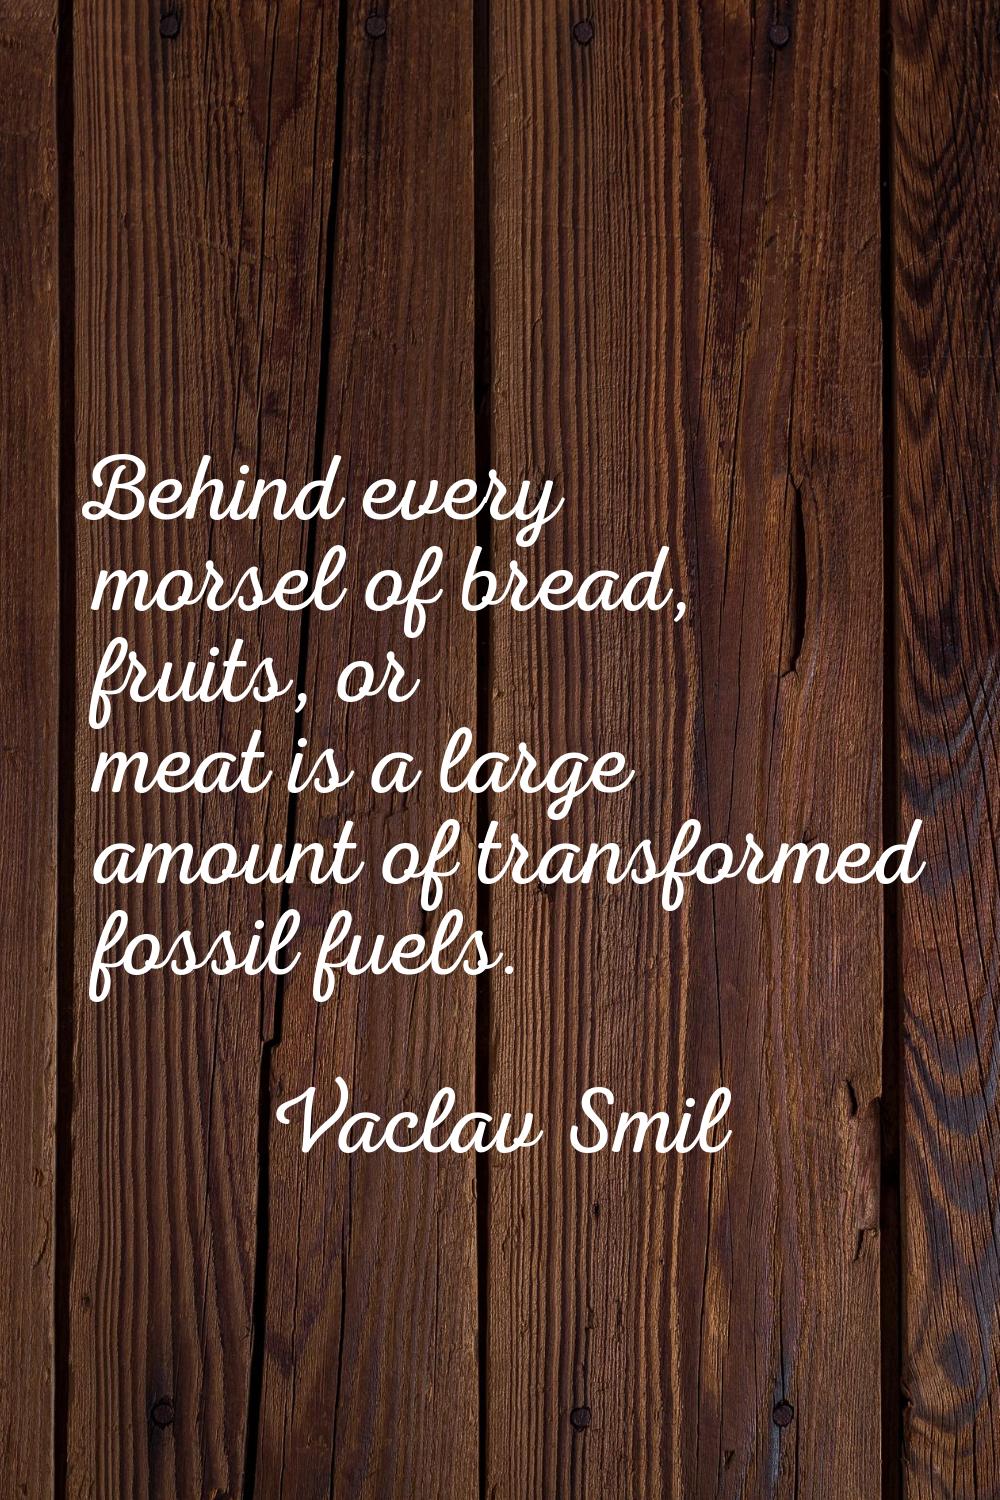 Behind every morsel of bread, fruits, or meat is a large amount of transformed fossil fuels.